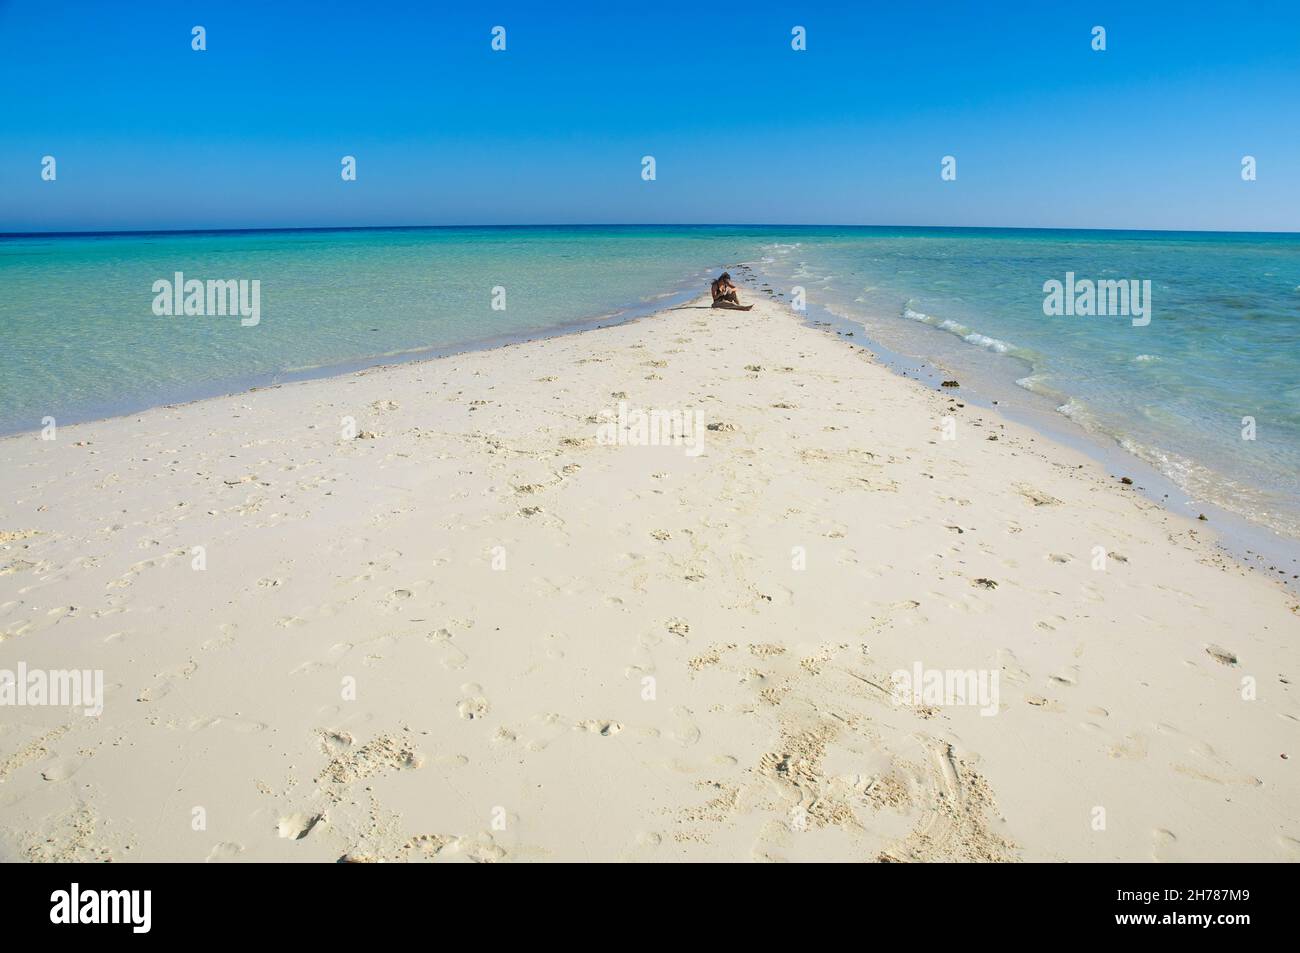 Egypt, Sinai Desert Peninsula , Ras Mohammed, woman in her twenties sits alone on a long stretch of deserted beach endless horizon of ocean and sky in Stock Photo